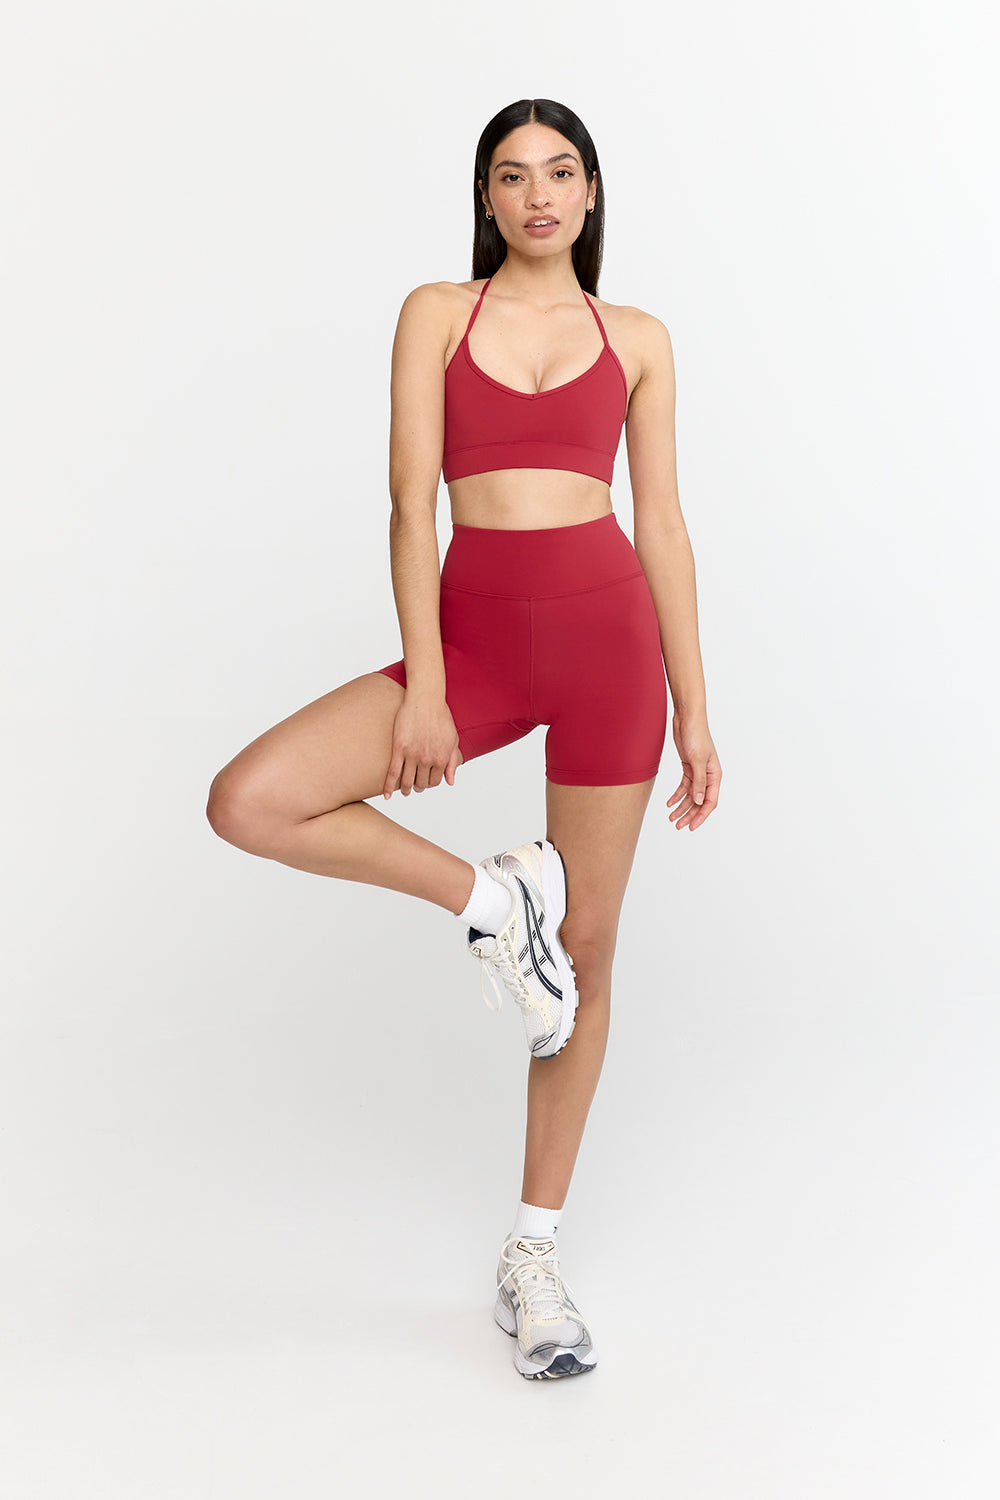 TALA Skinluxe legging shorts in pink exclusive to ASOS with